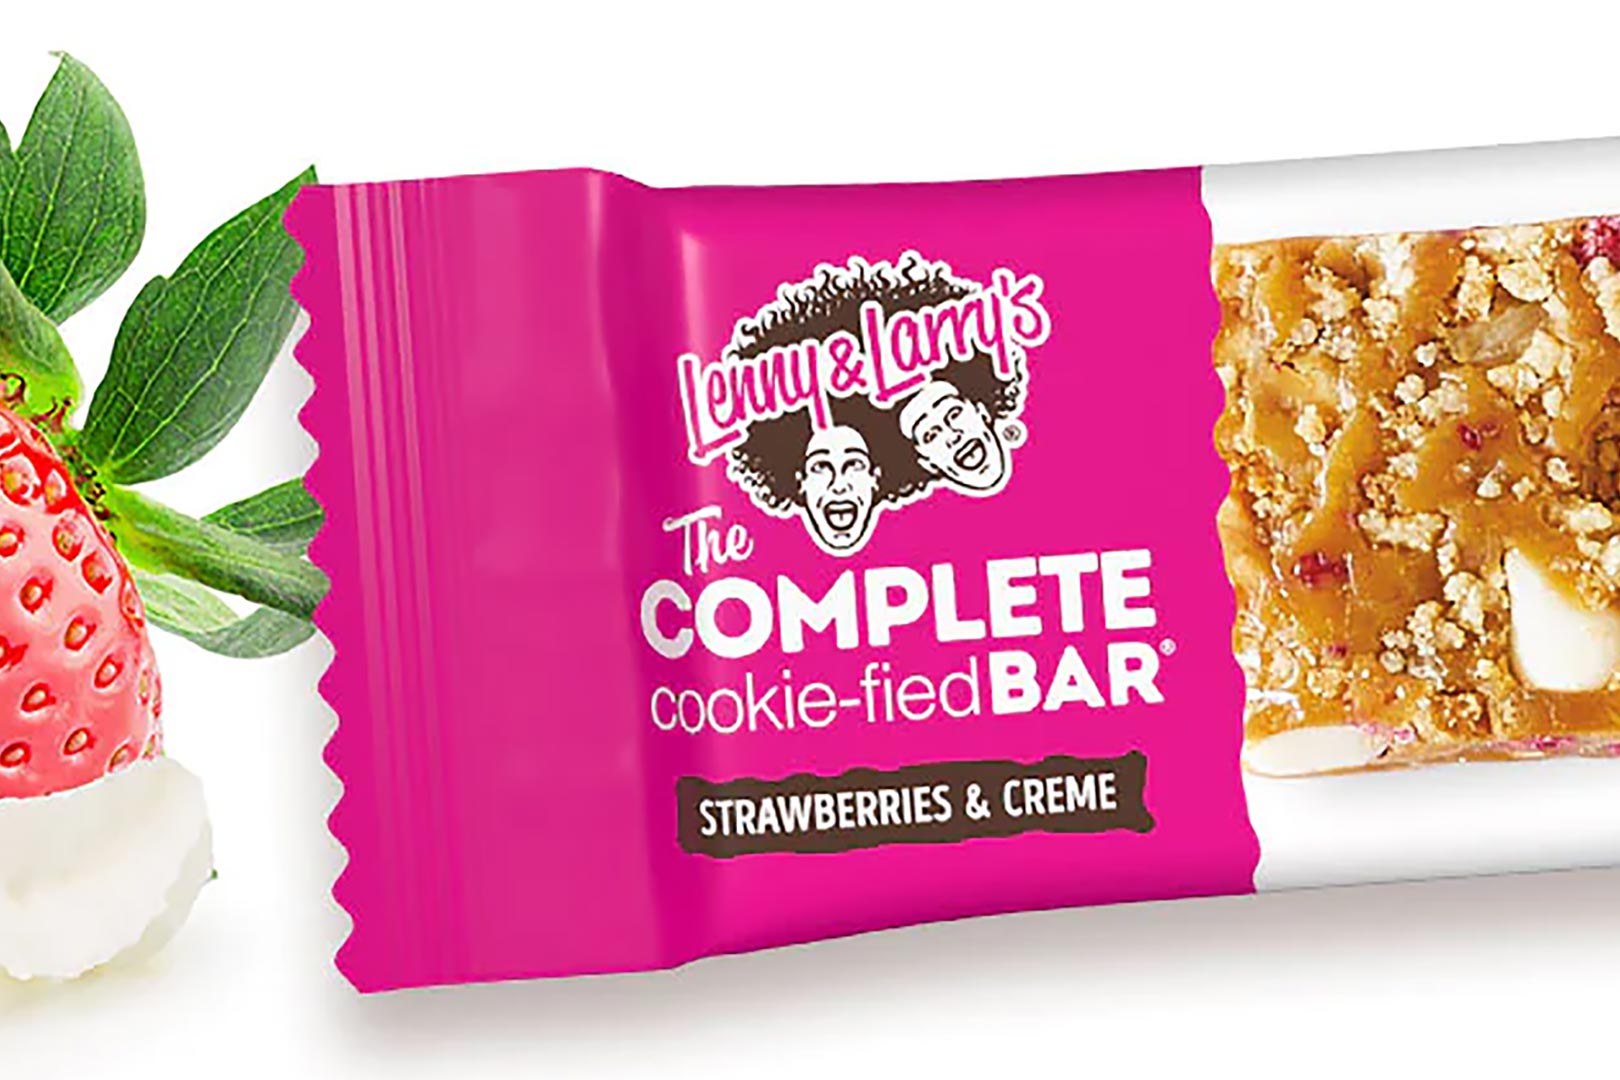 Lenny Larrys Strawberries Creme Cookie Fied Bar